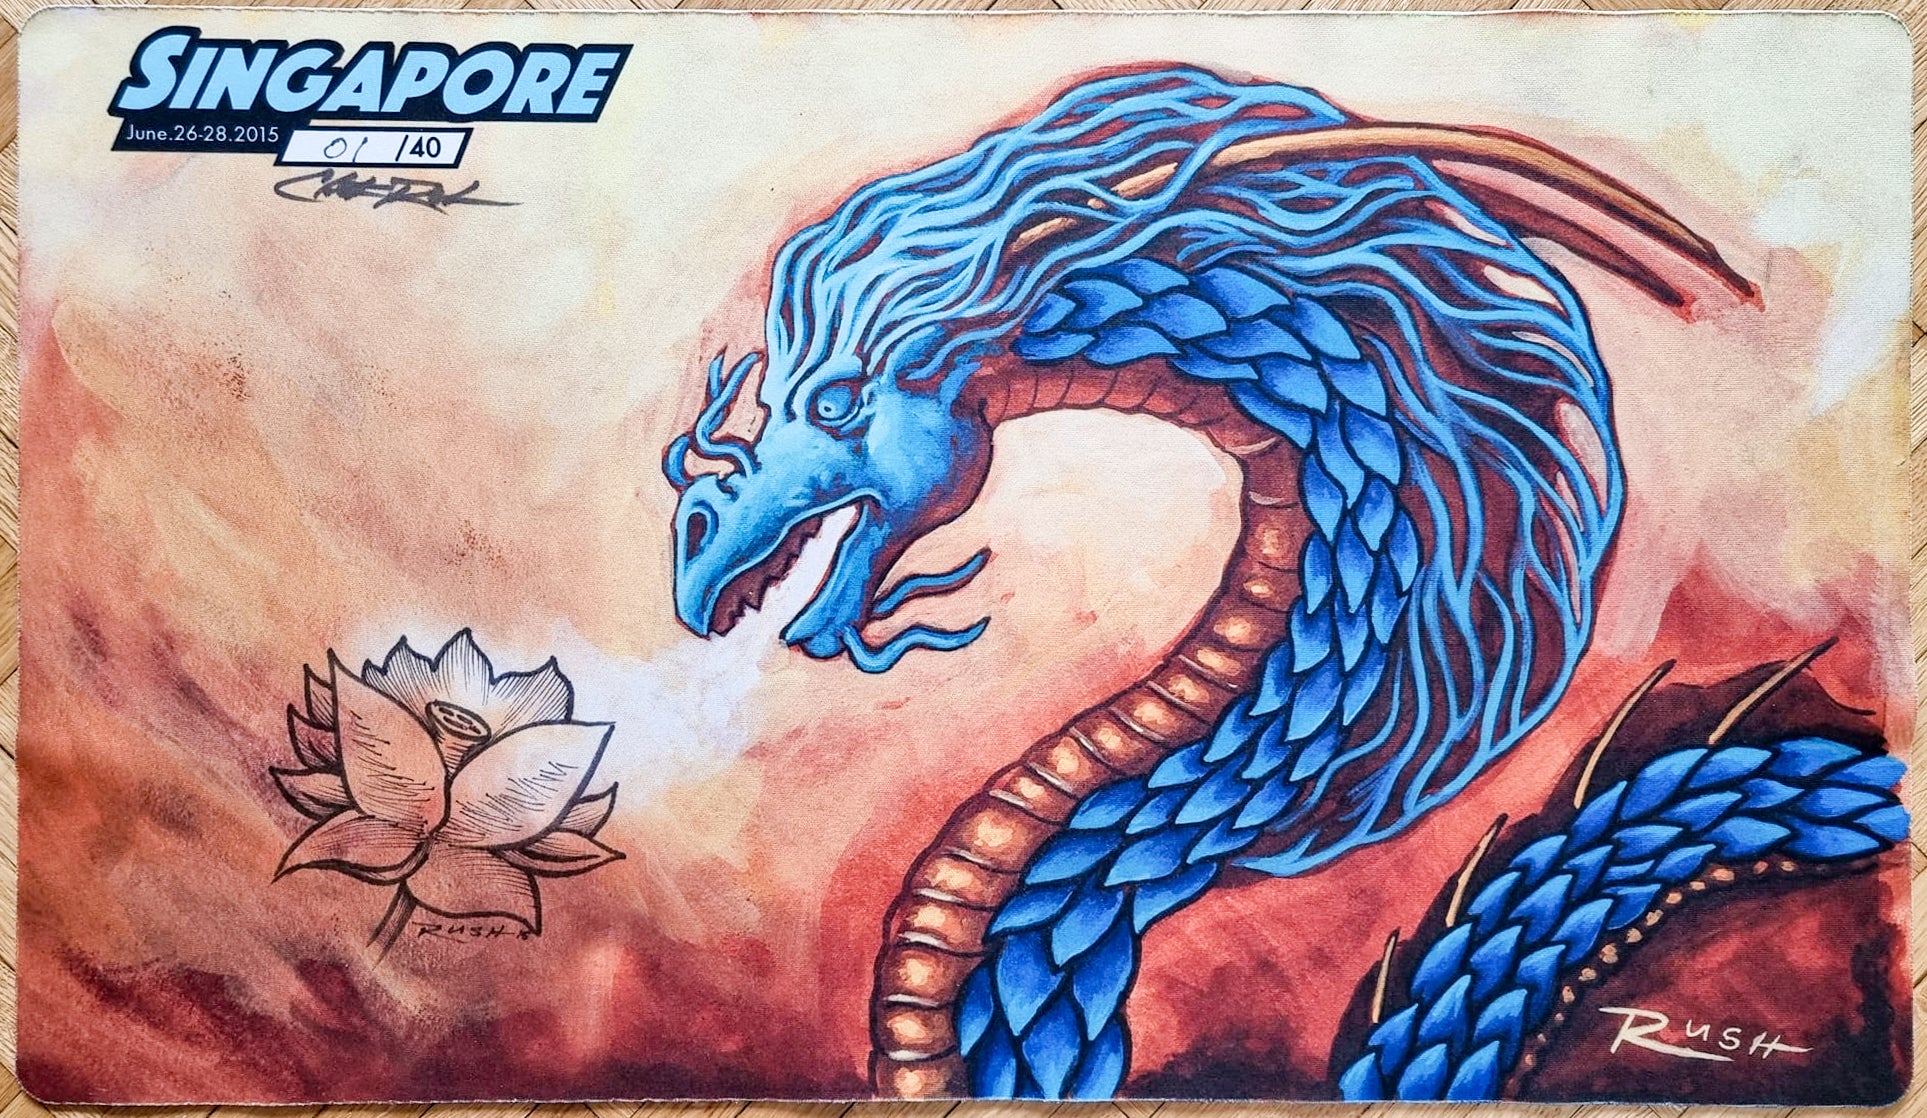 Shichifukujin Dragon - Christopher Rush - Grand Prix Singapore 2015 - Signed by the Artist - Limited Edition - Sketched - MTG Playmat